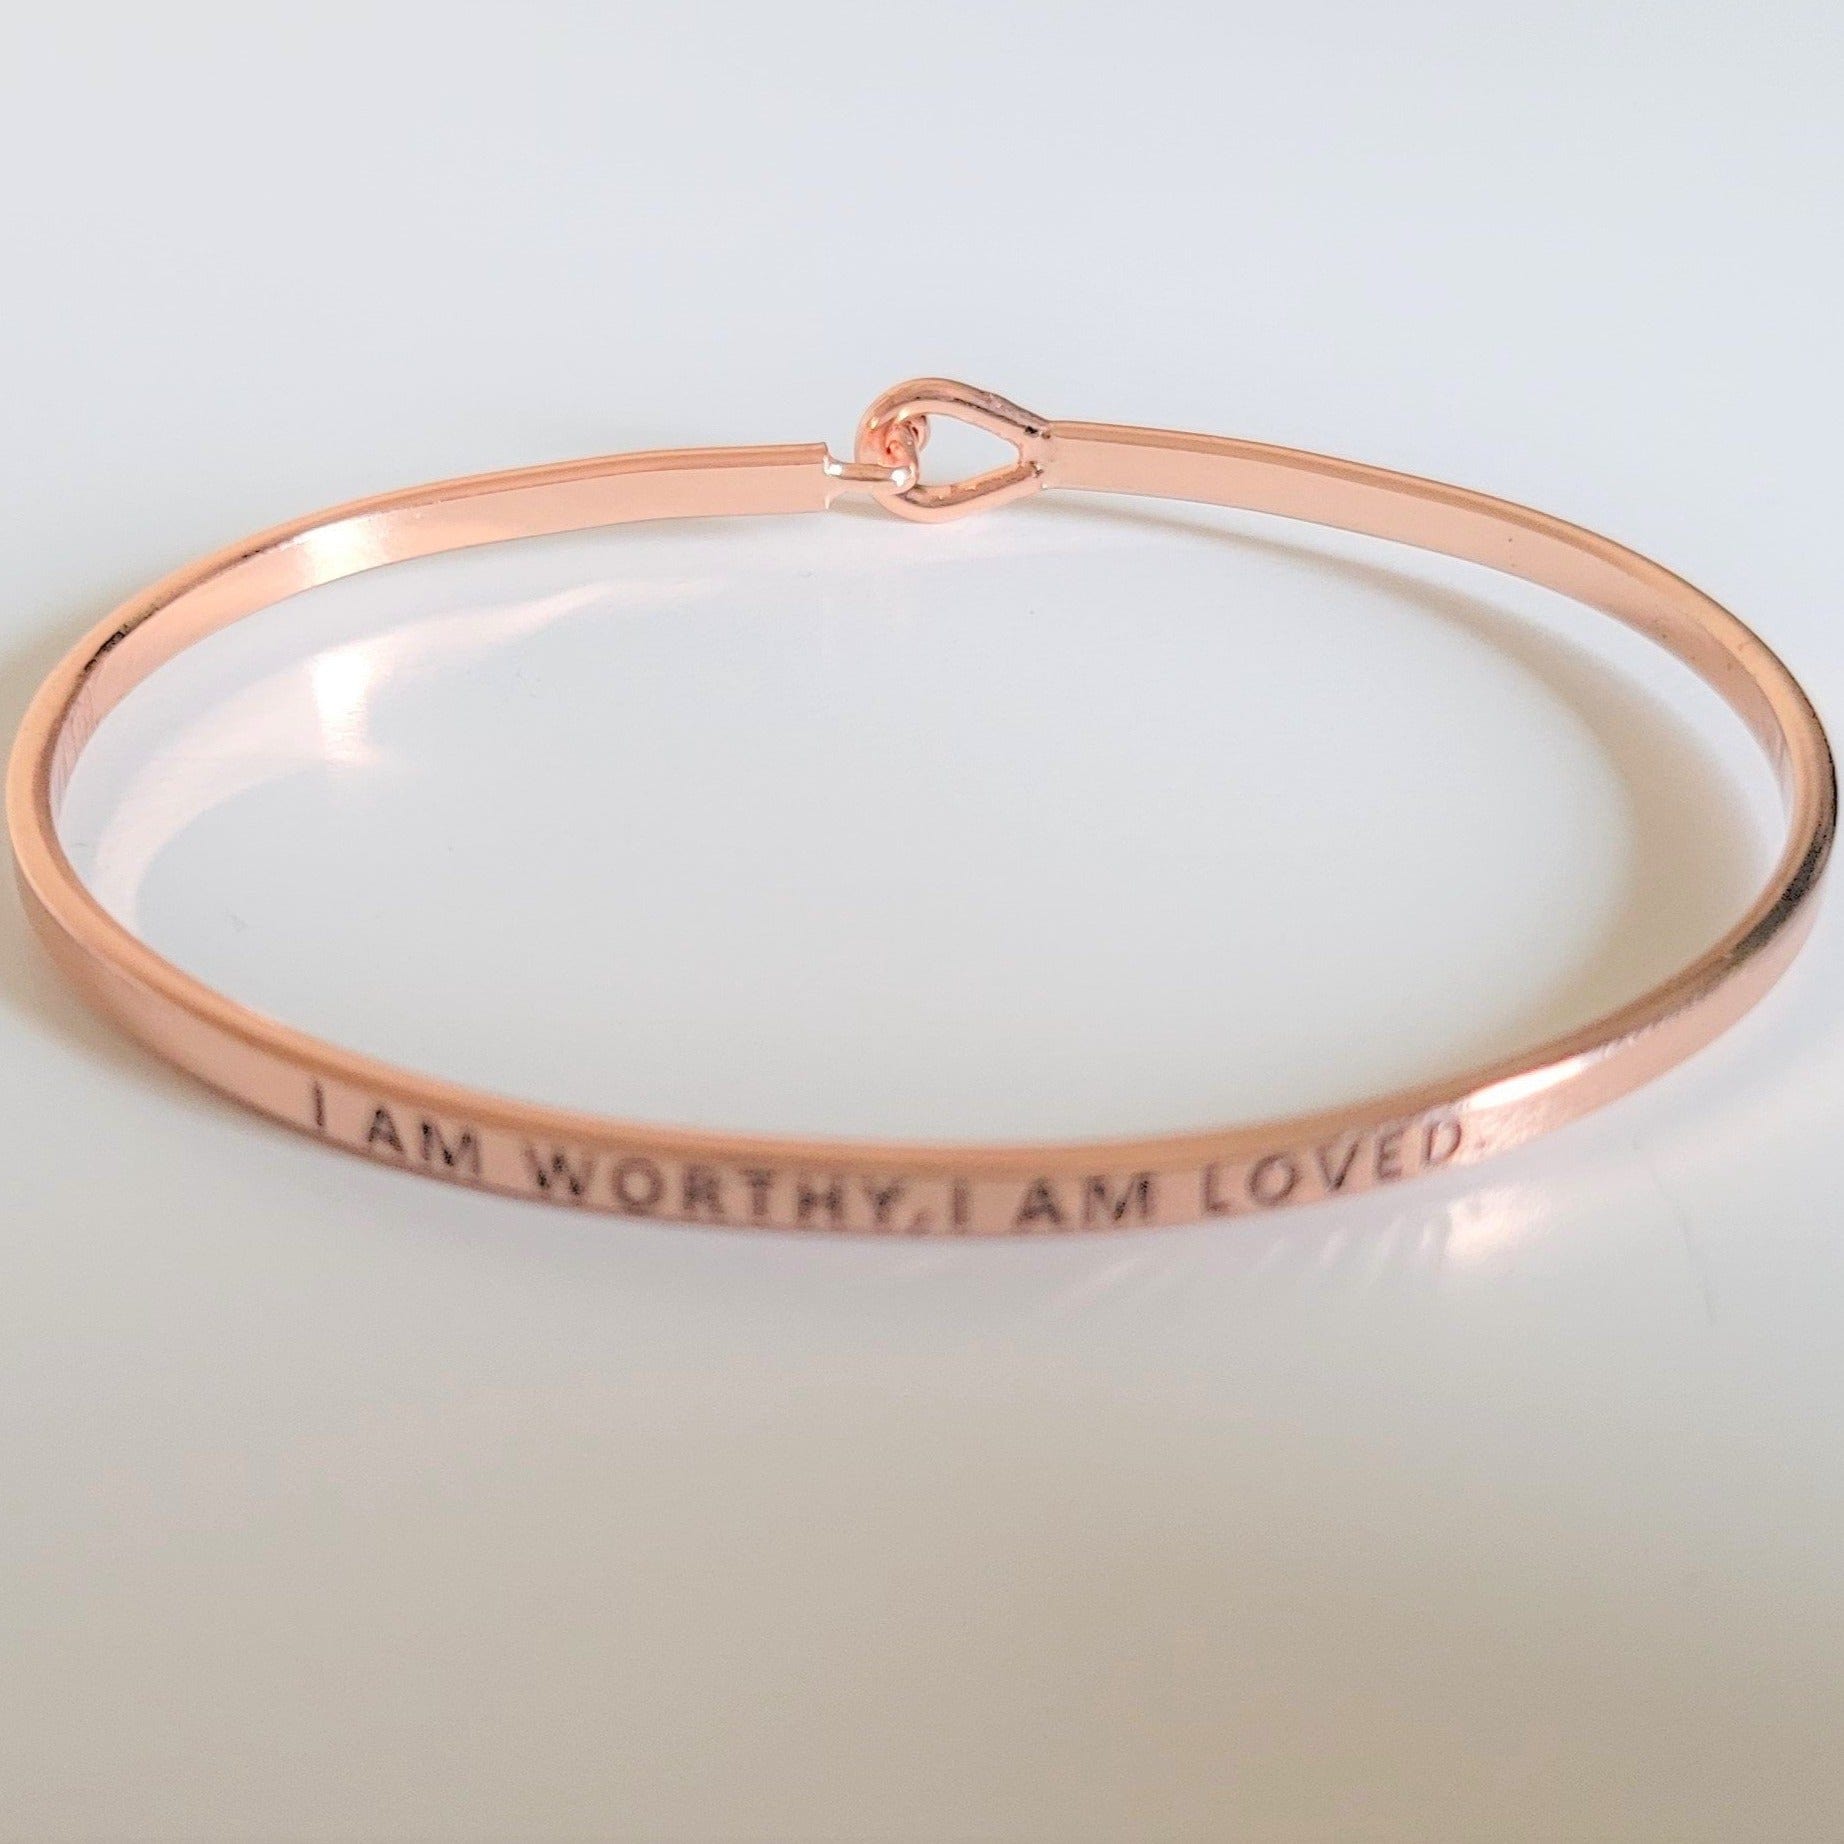 "I Am Worthy, I Am Loved" Bracelet By Recovery Matters Rose Gold